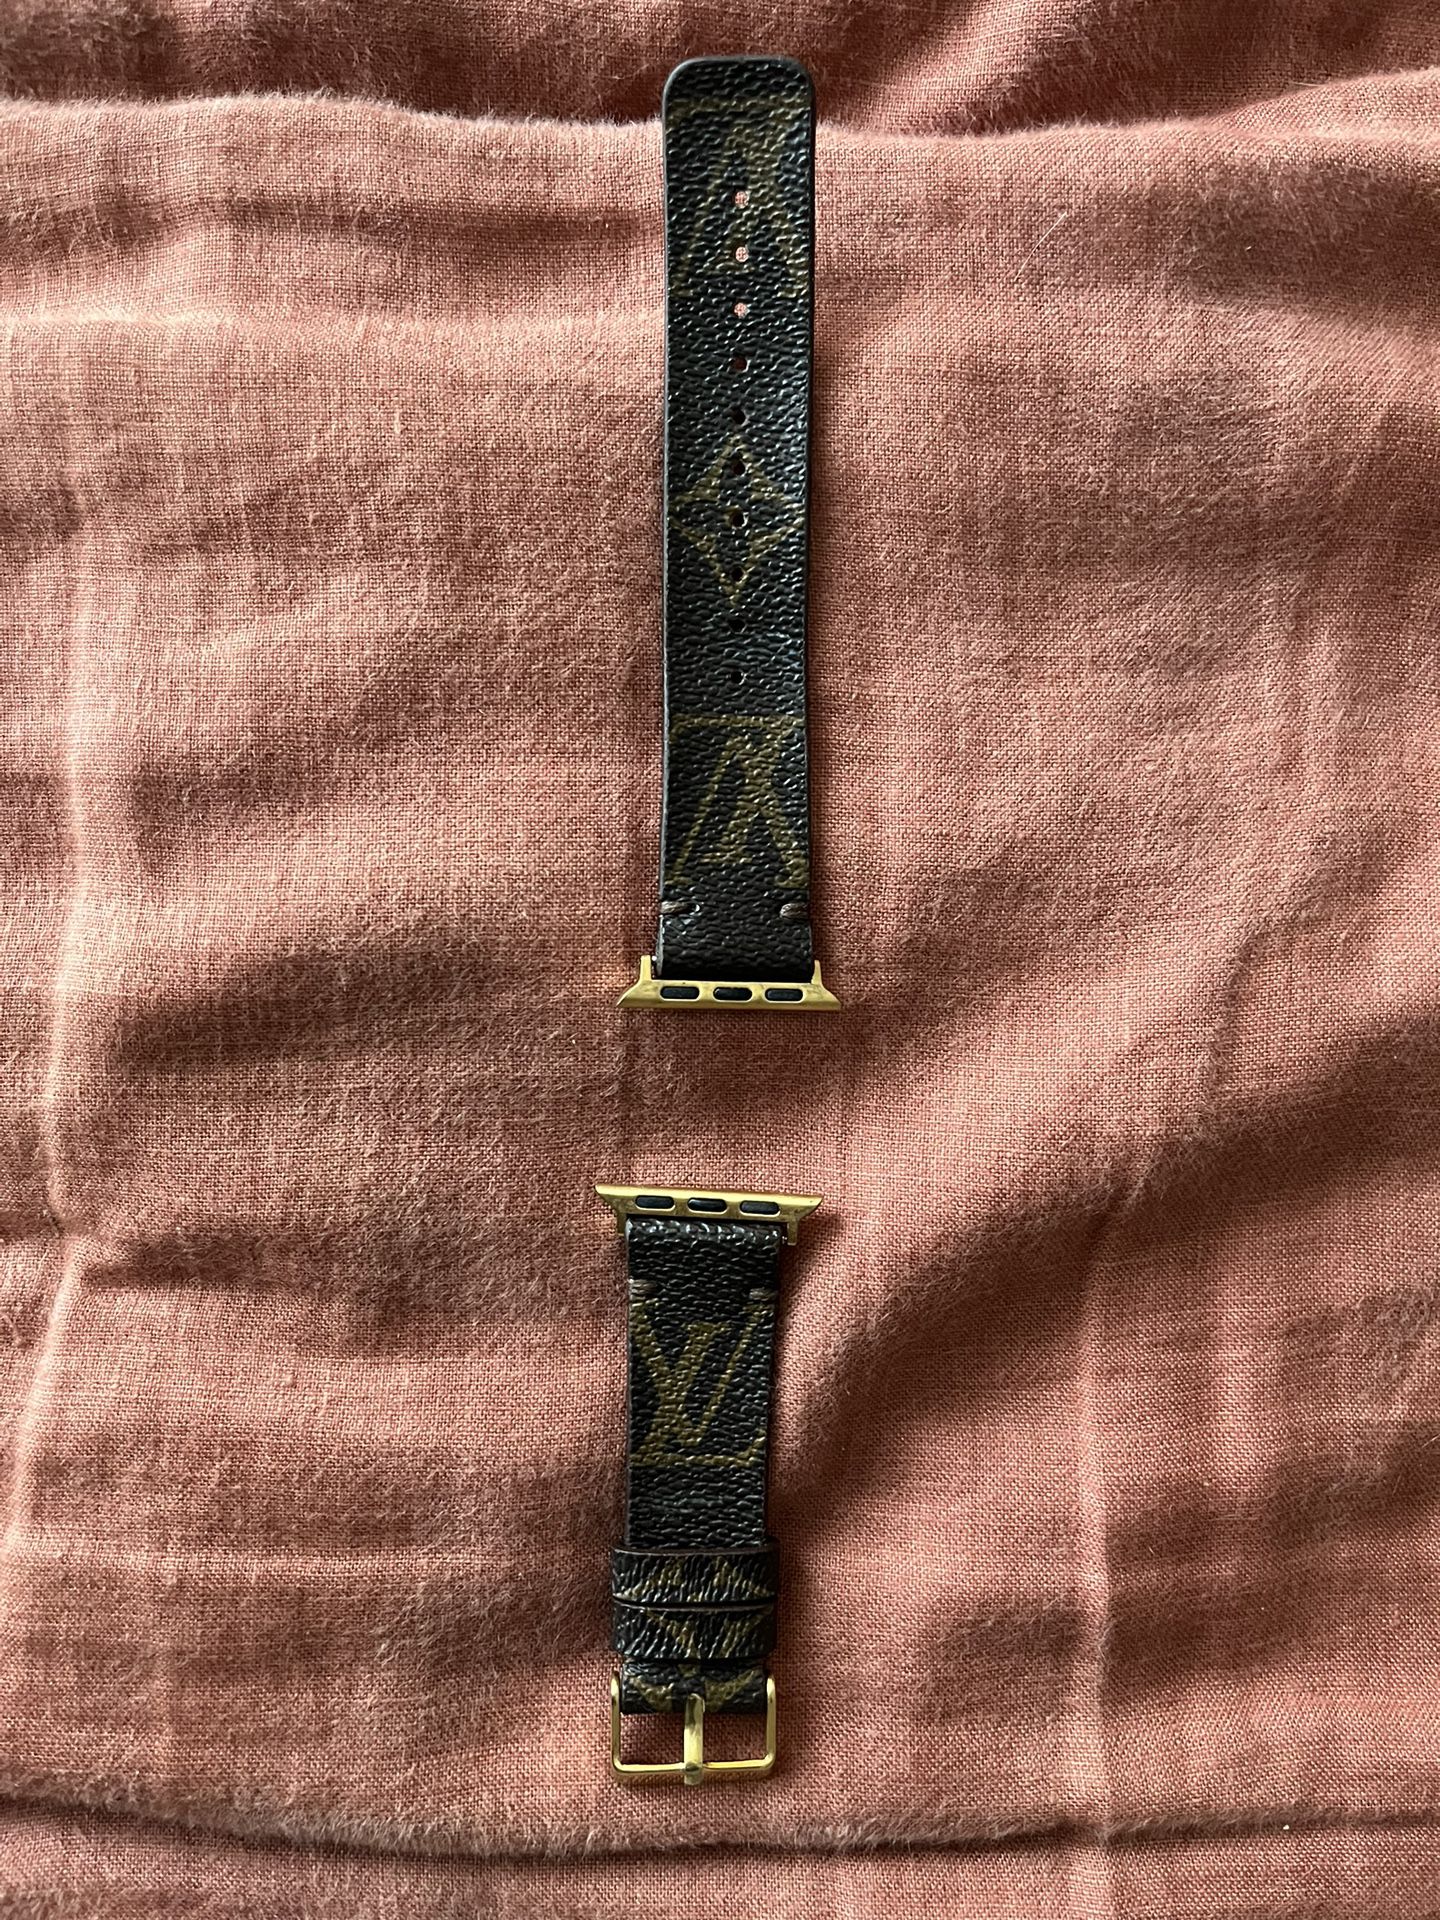 Louis Vuitton Damier Apple Watch Band for Sale in Indian Wells, CA - OfferUp